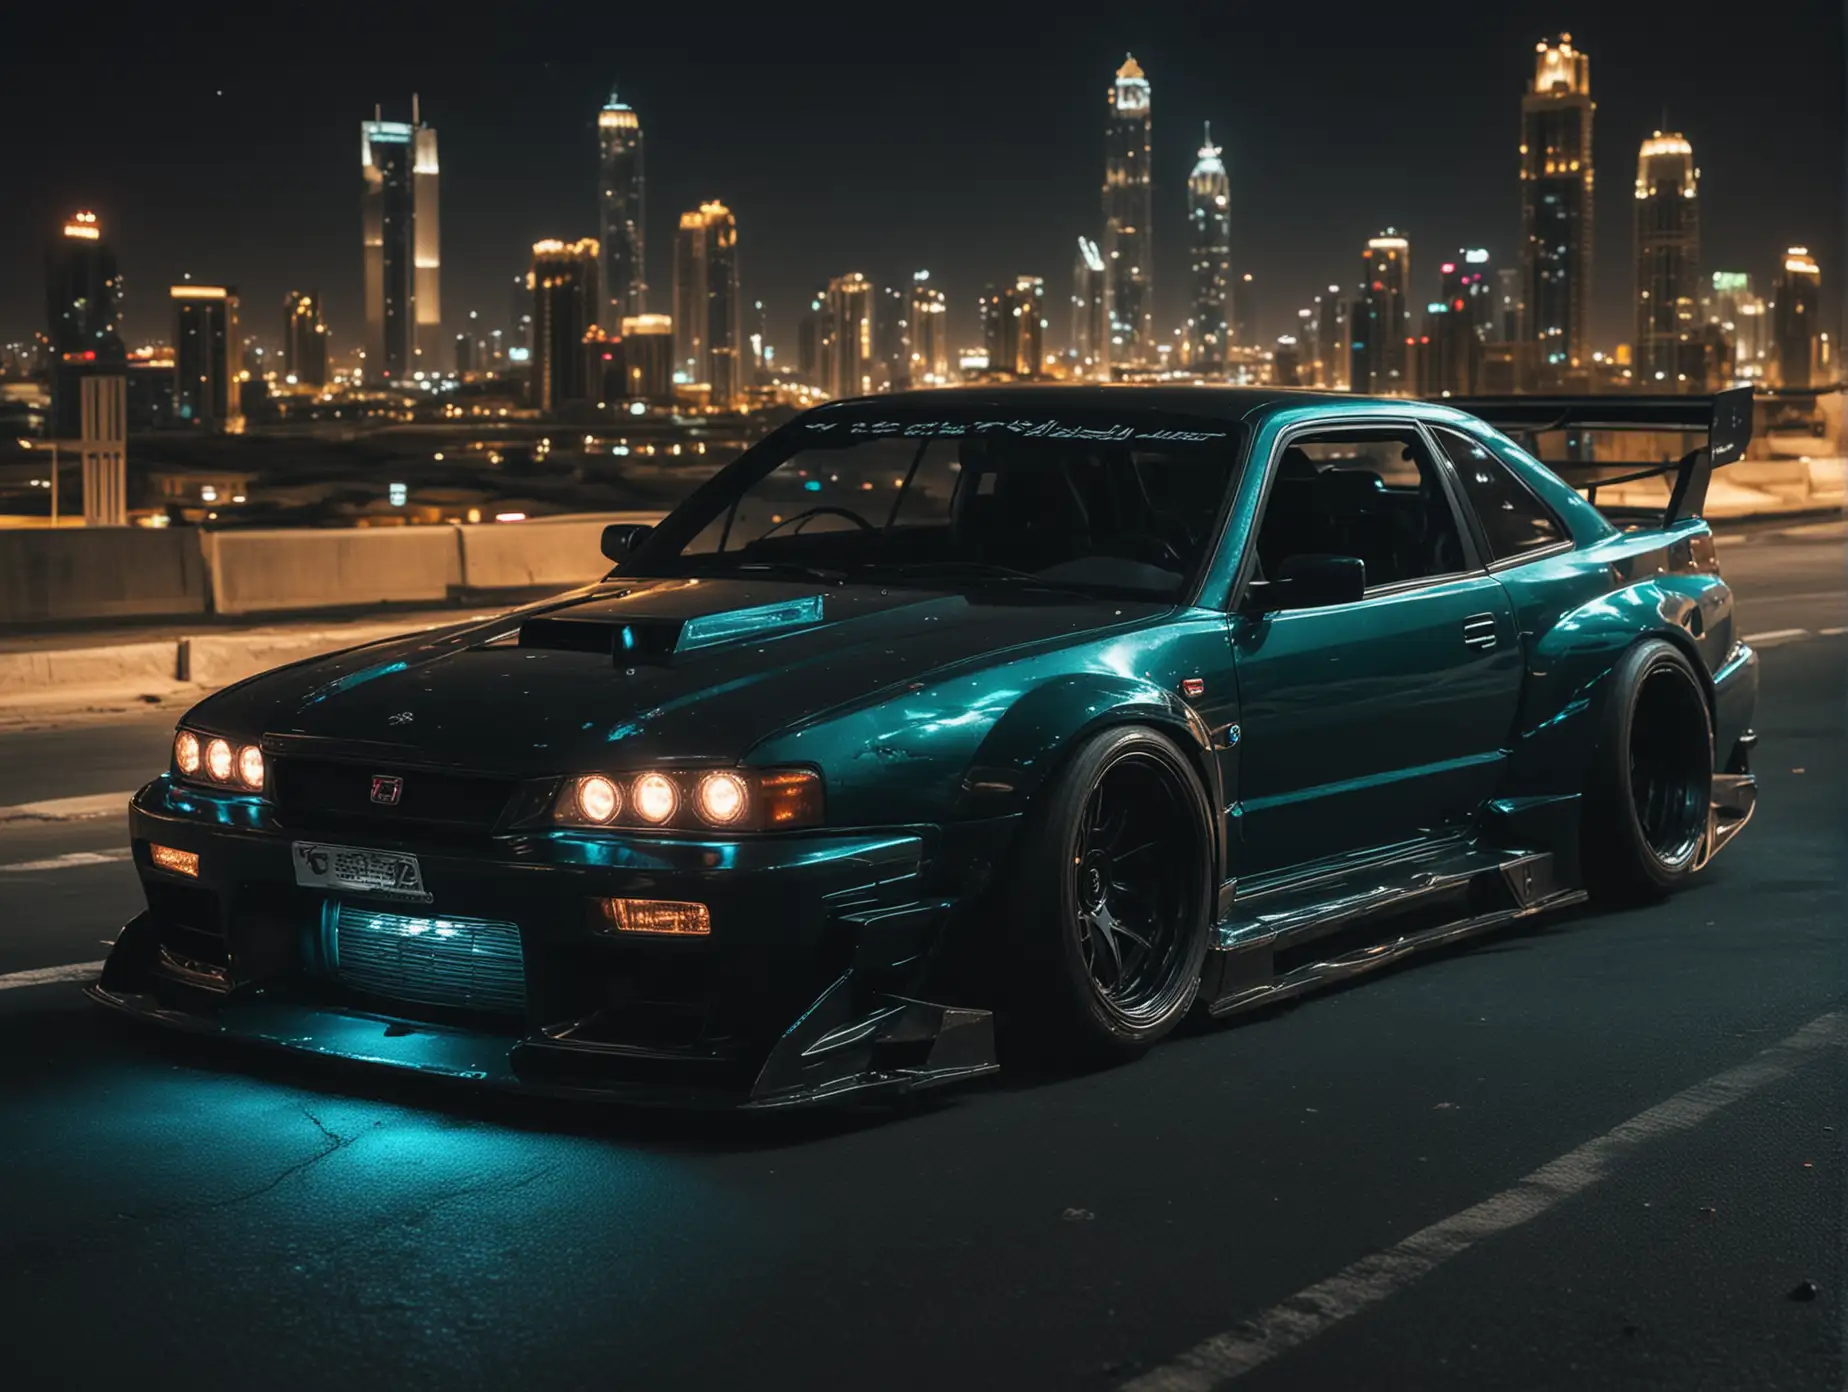 Create japanese drifting cars from dark angel, evil tuning type, Downhill in the city of dubai drifting at night rear view from high far away,  car color dark black, dark turquoise  and violent car lights.